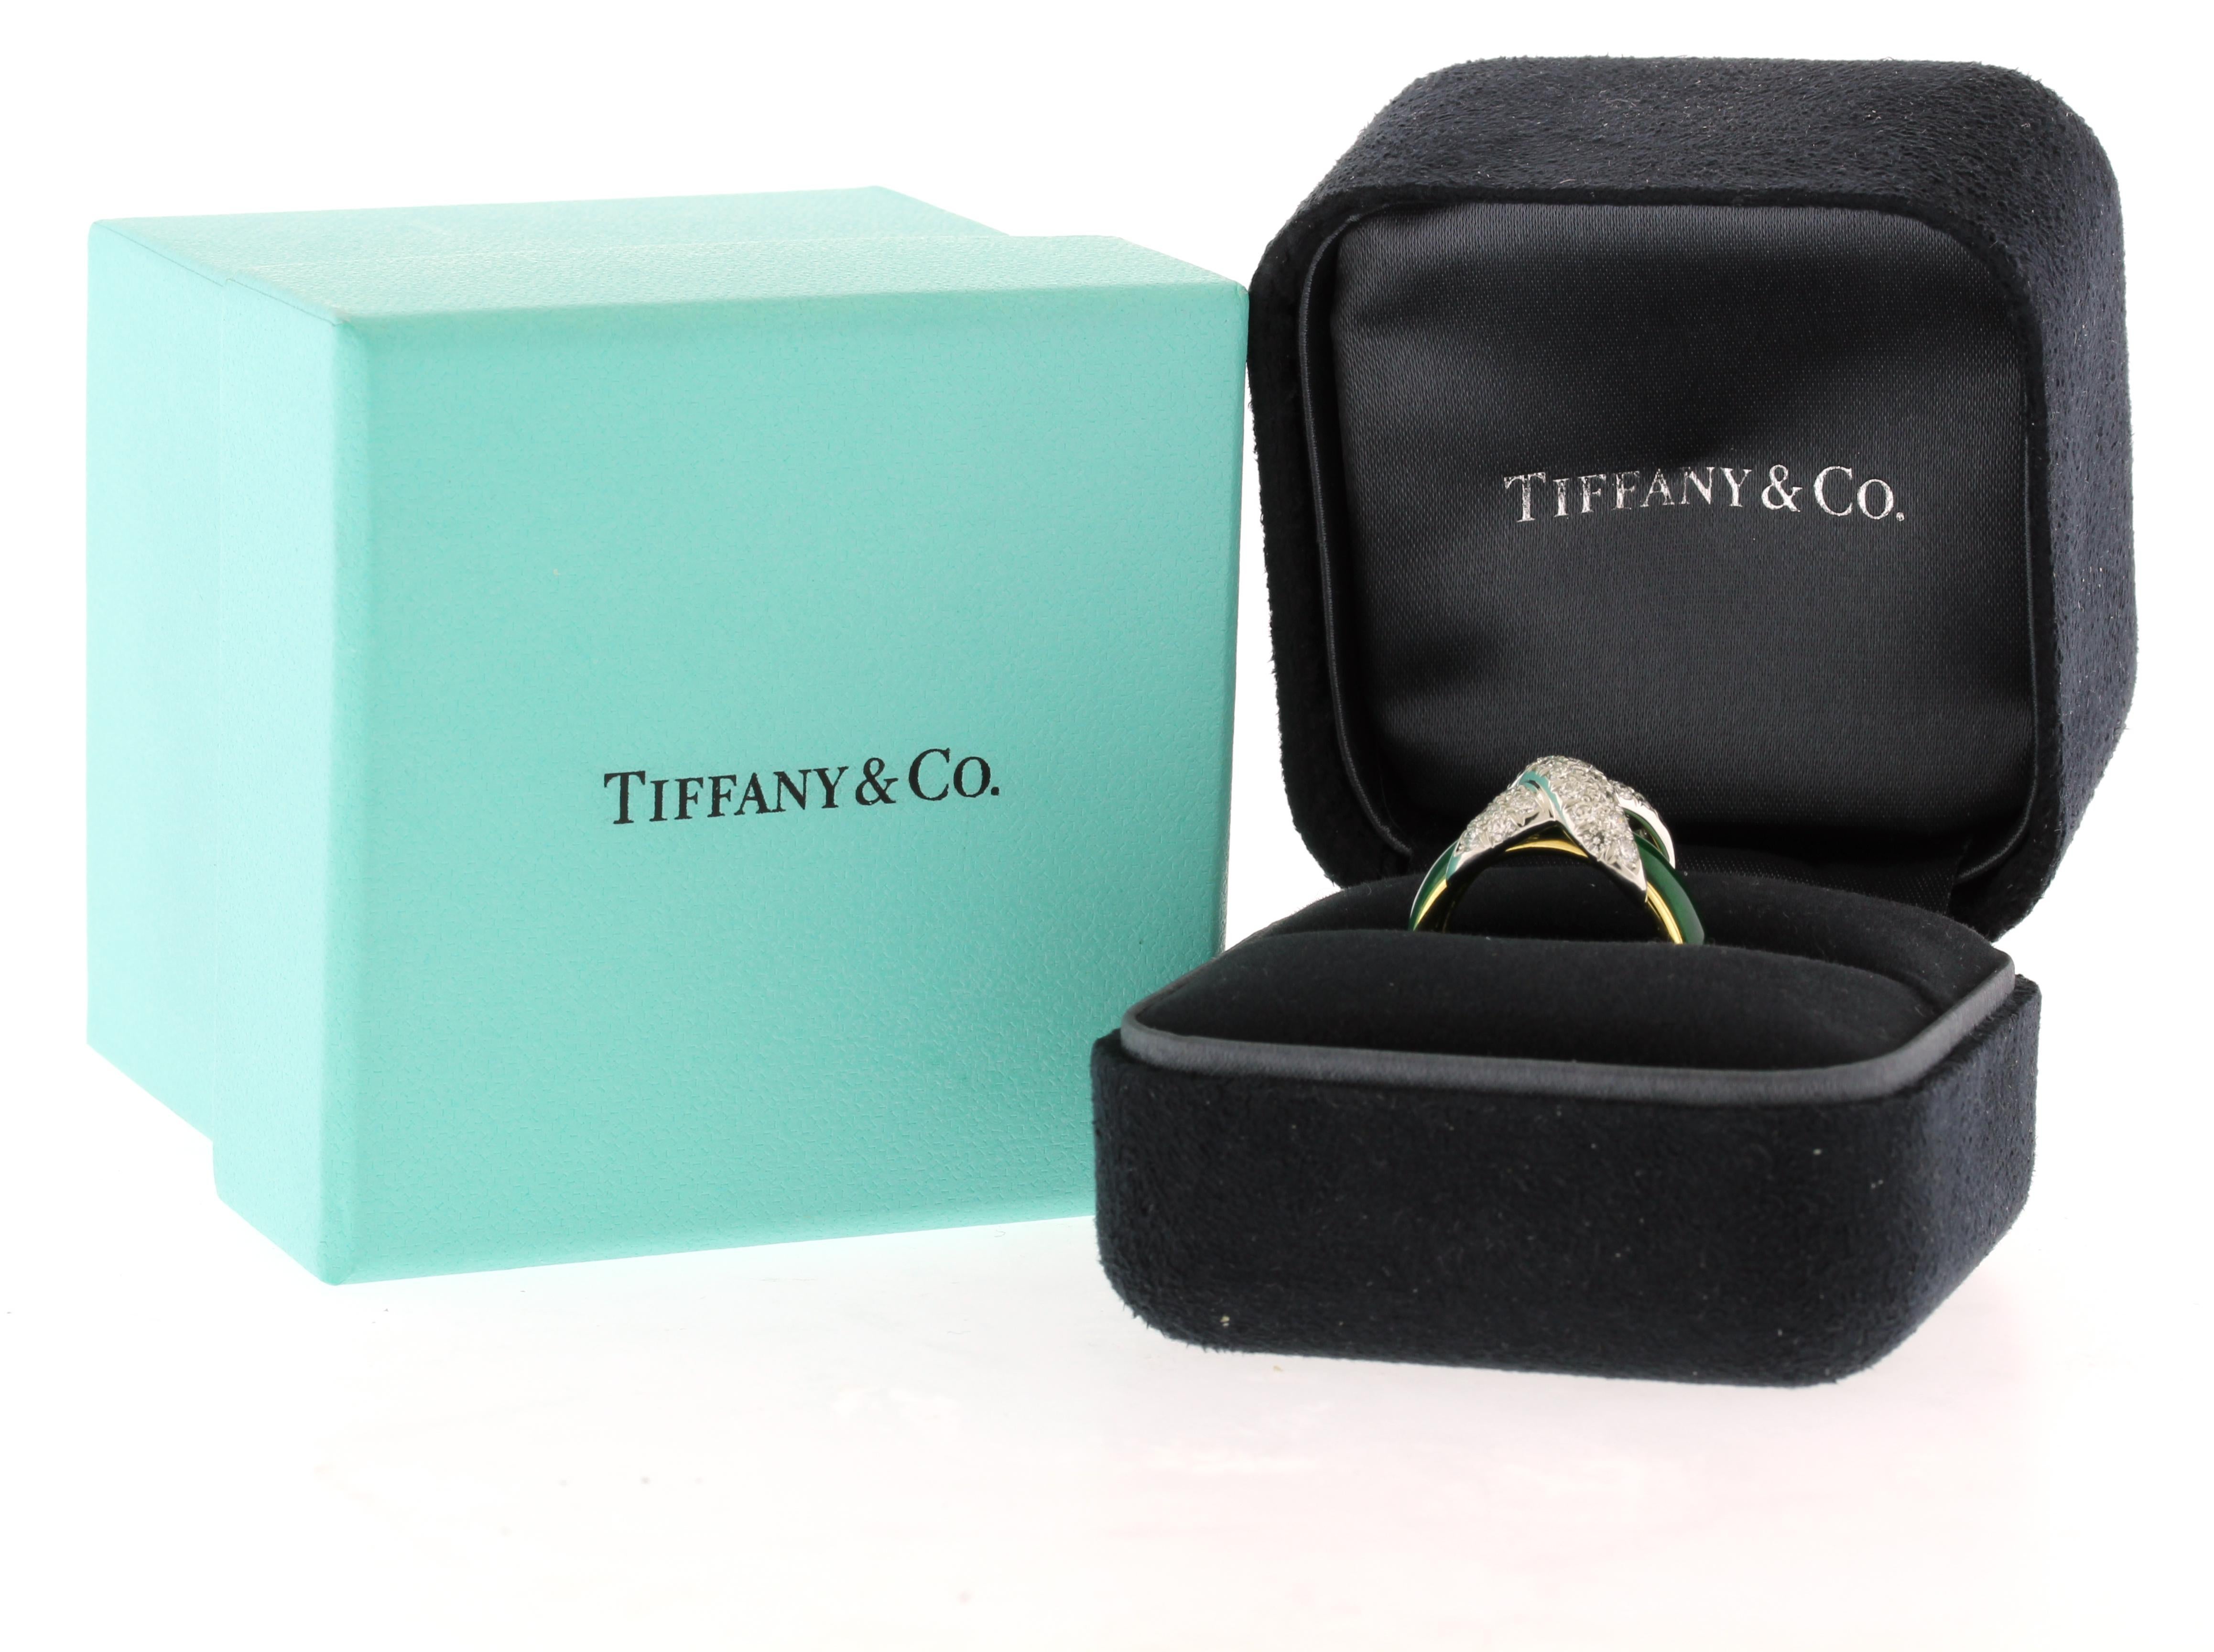 From Jean Schlumberger for Tiffany & Co, the pave X ring has green enamel
♦ Designer: Schlumberger for Tiffany & Co
♦ Metal: 18kt yellow gold and Platinum
♦ Diamond weighs: approximately  .85cts
♦ Size: 7 1/4
♦ Packaging: Tiffany Box
♦ Condition: